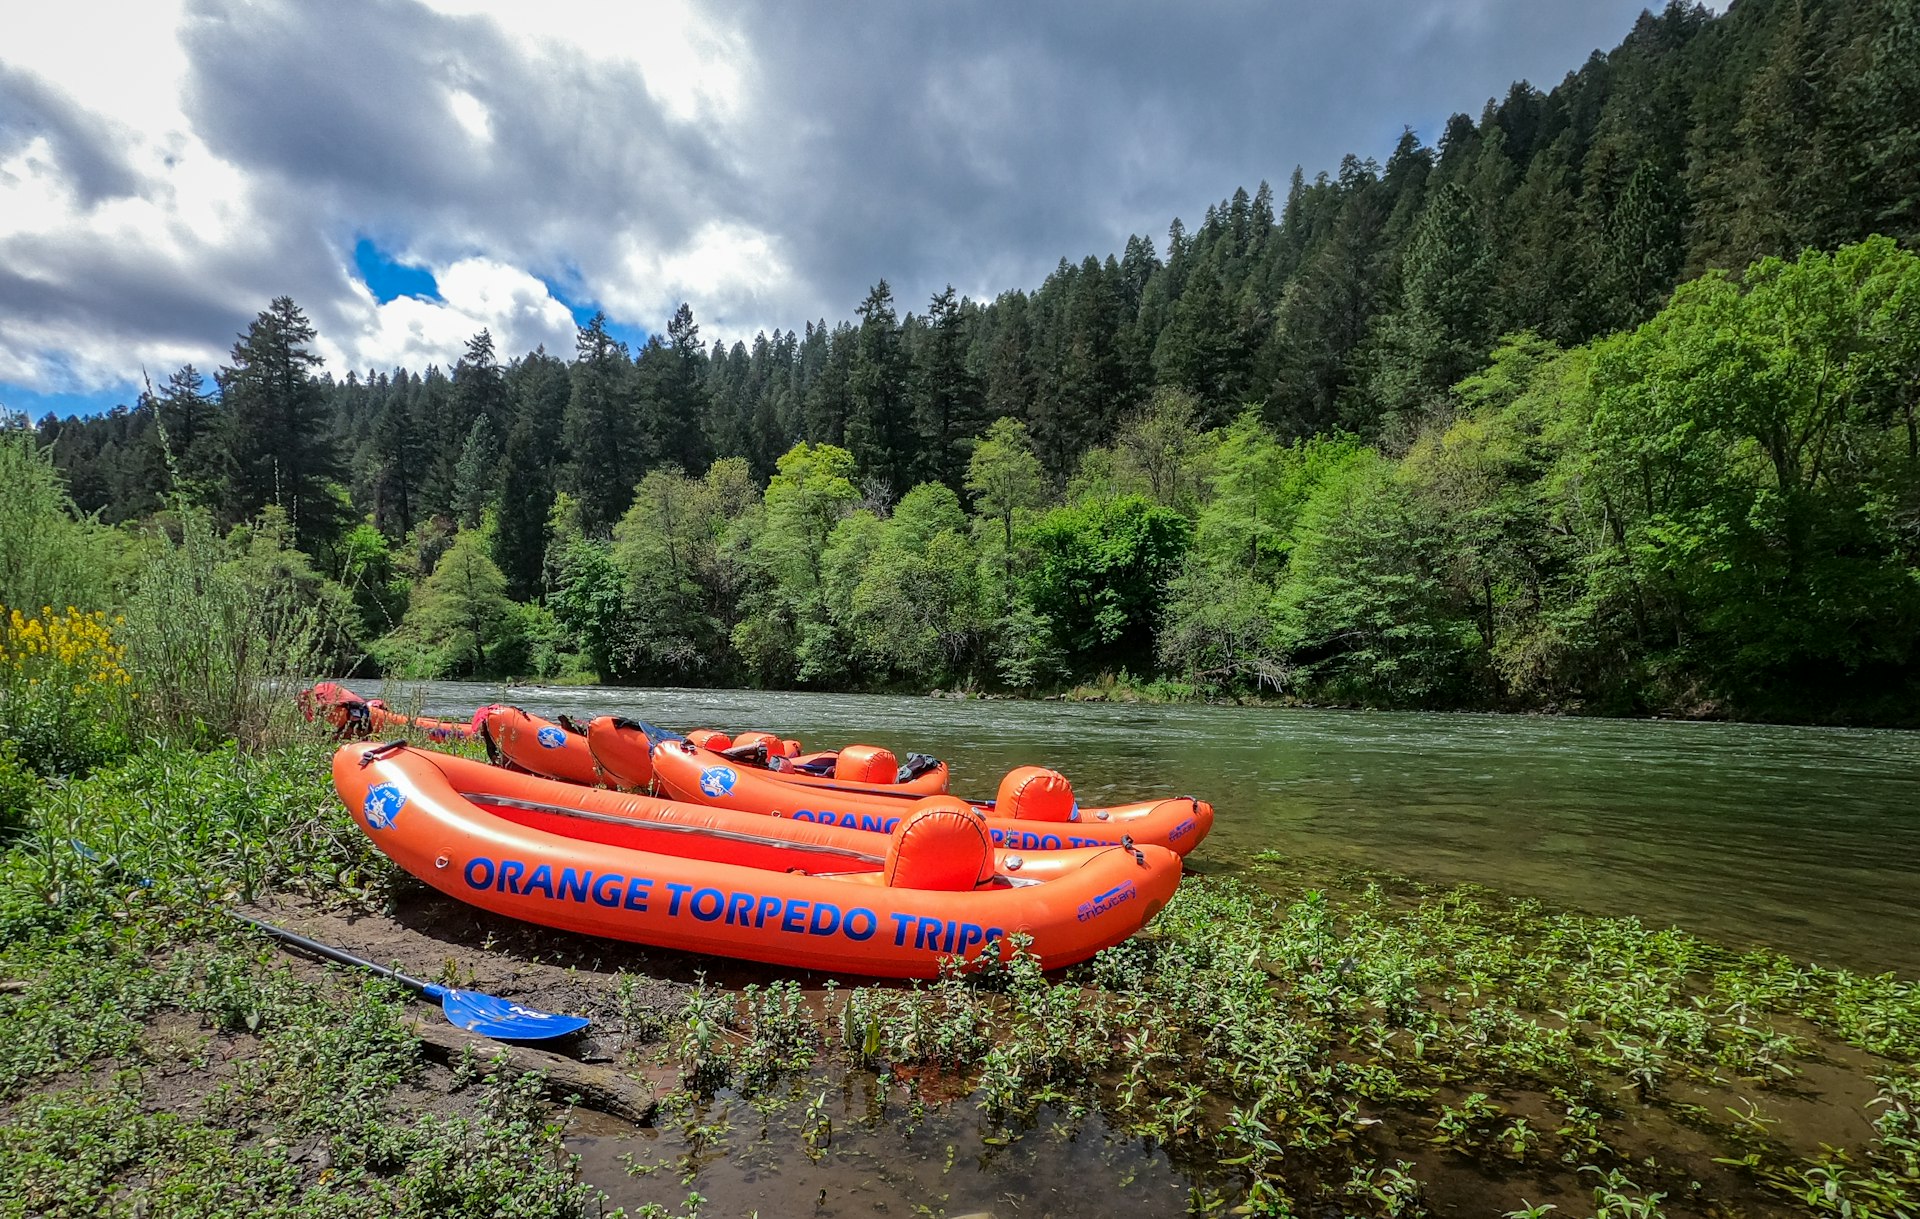 Five inflatable orange boats on the banks of the Rogue River in Oregon